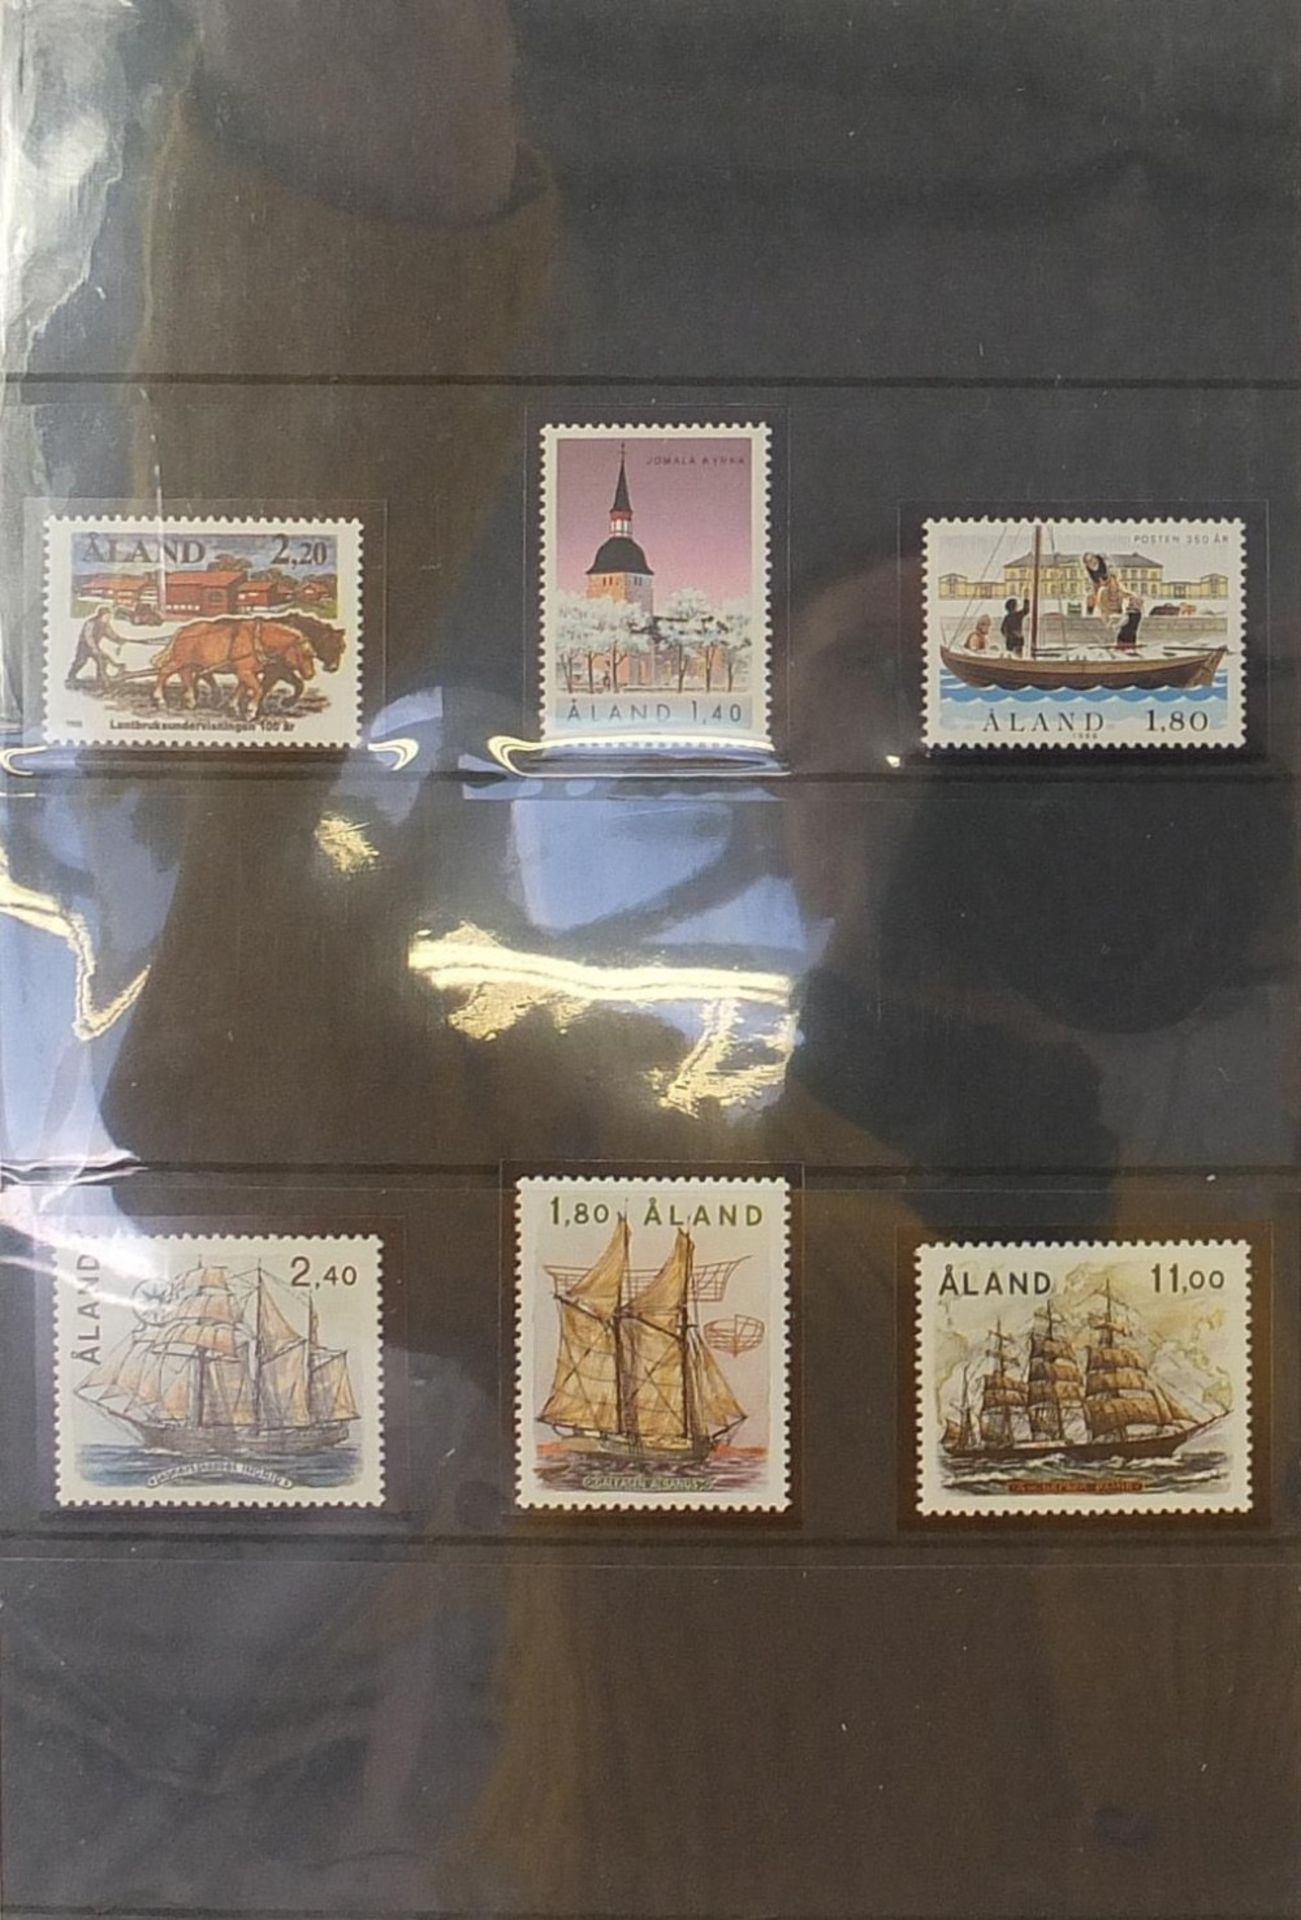 Extensive collection of antique and later world stamps arranged in albums including Brazil, - Image 49 of 52